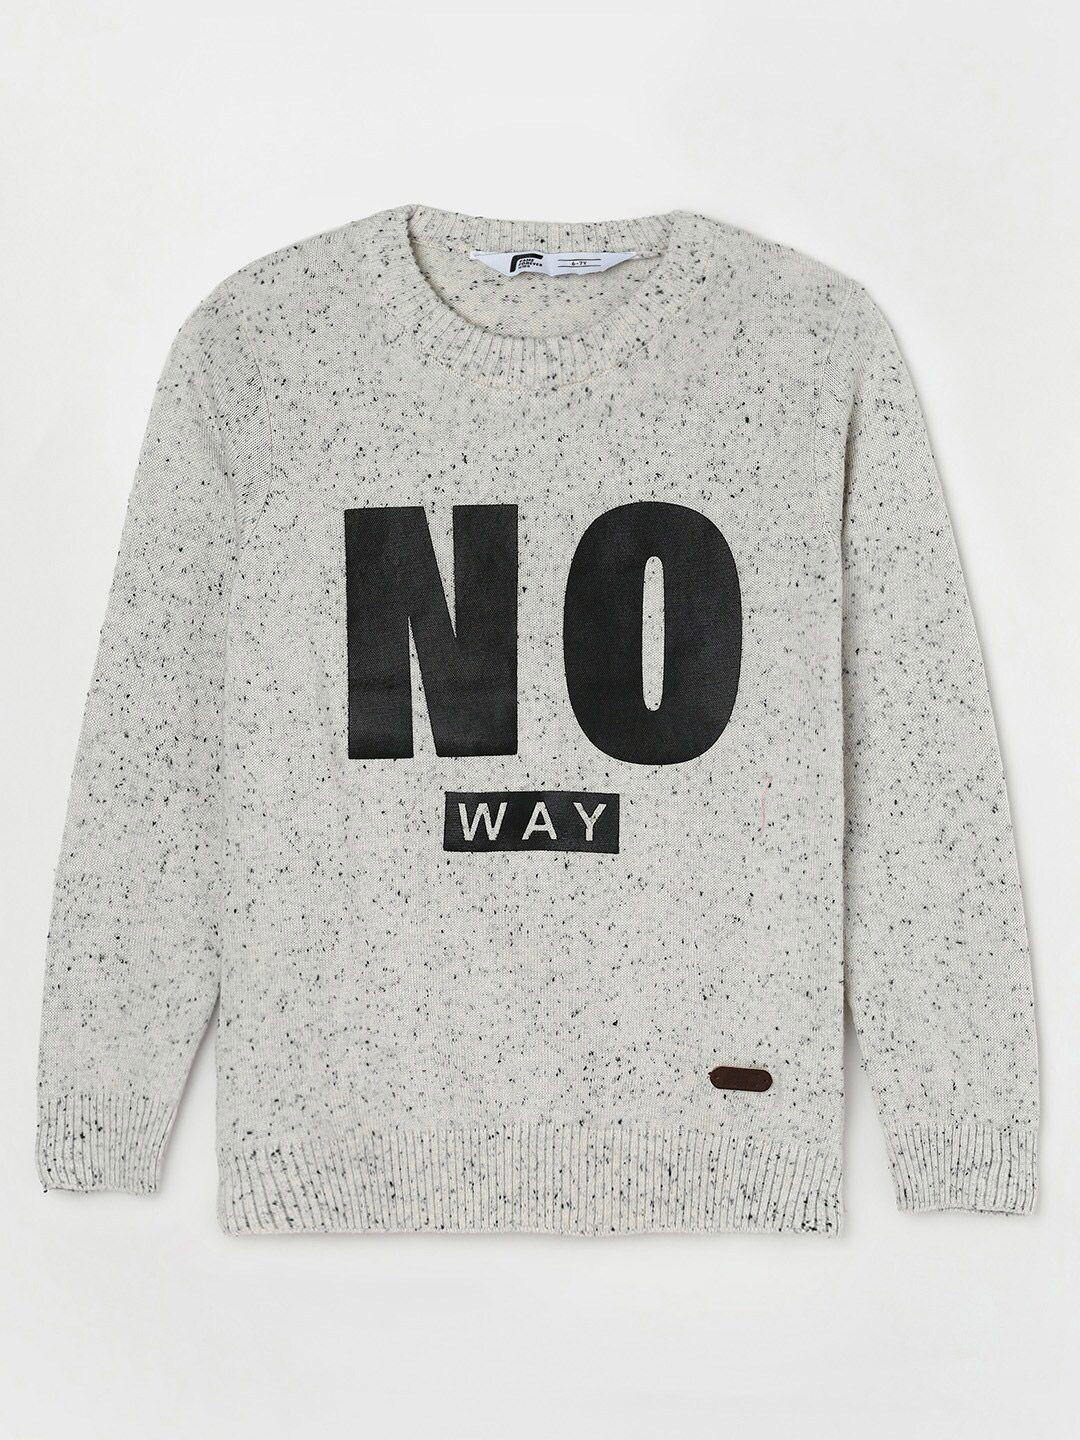 fame-forever-by-lifestyle-boys-cotton-typography-printed-pullover